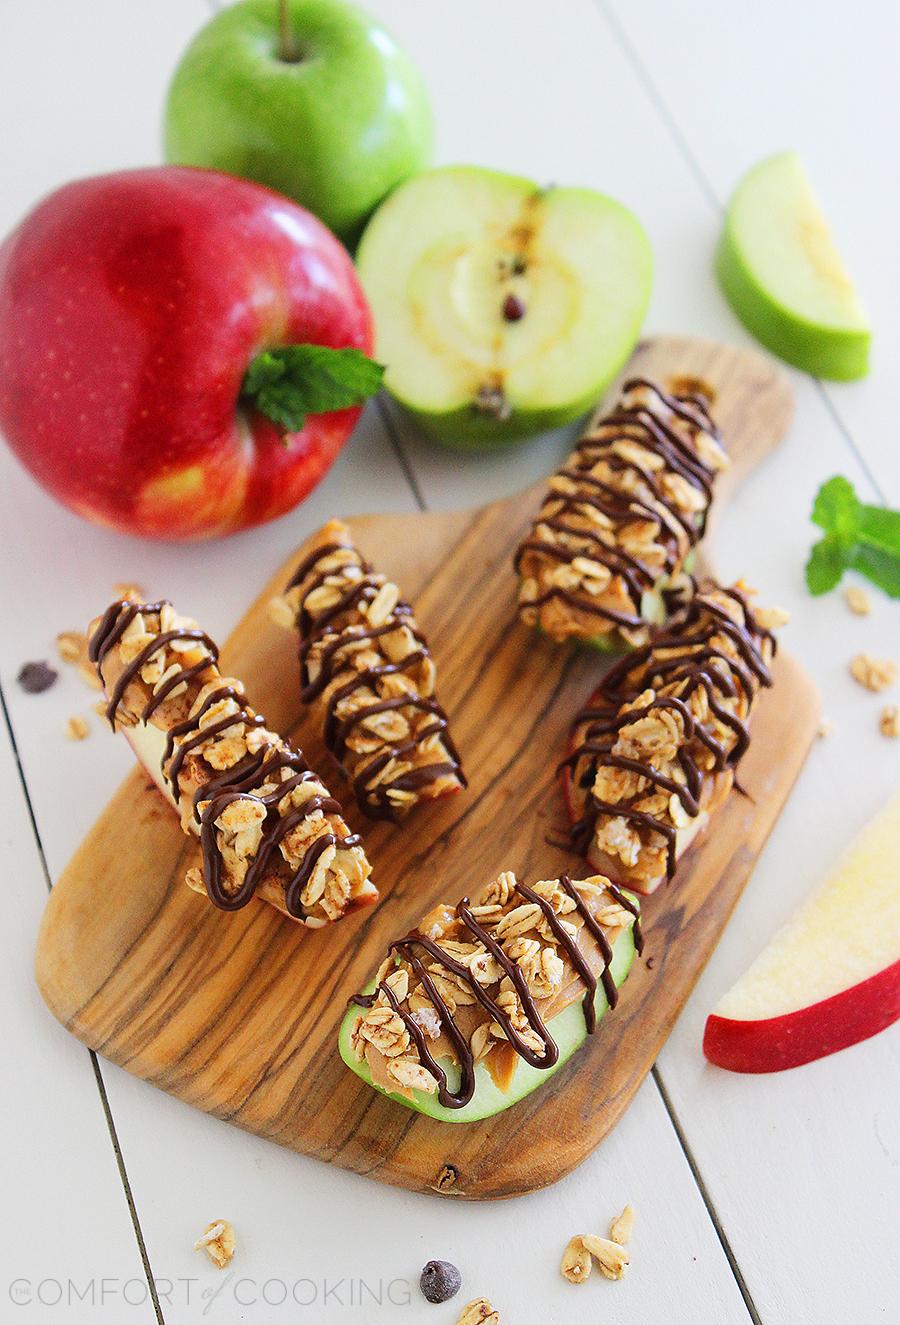 Chocolate-Peanut Butter Granola Apple Bites – Snack on these super easy, delicious and nutritious apple granola bites with a chocolate drizzle! | thecomfortofcooking.com